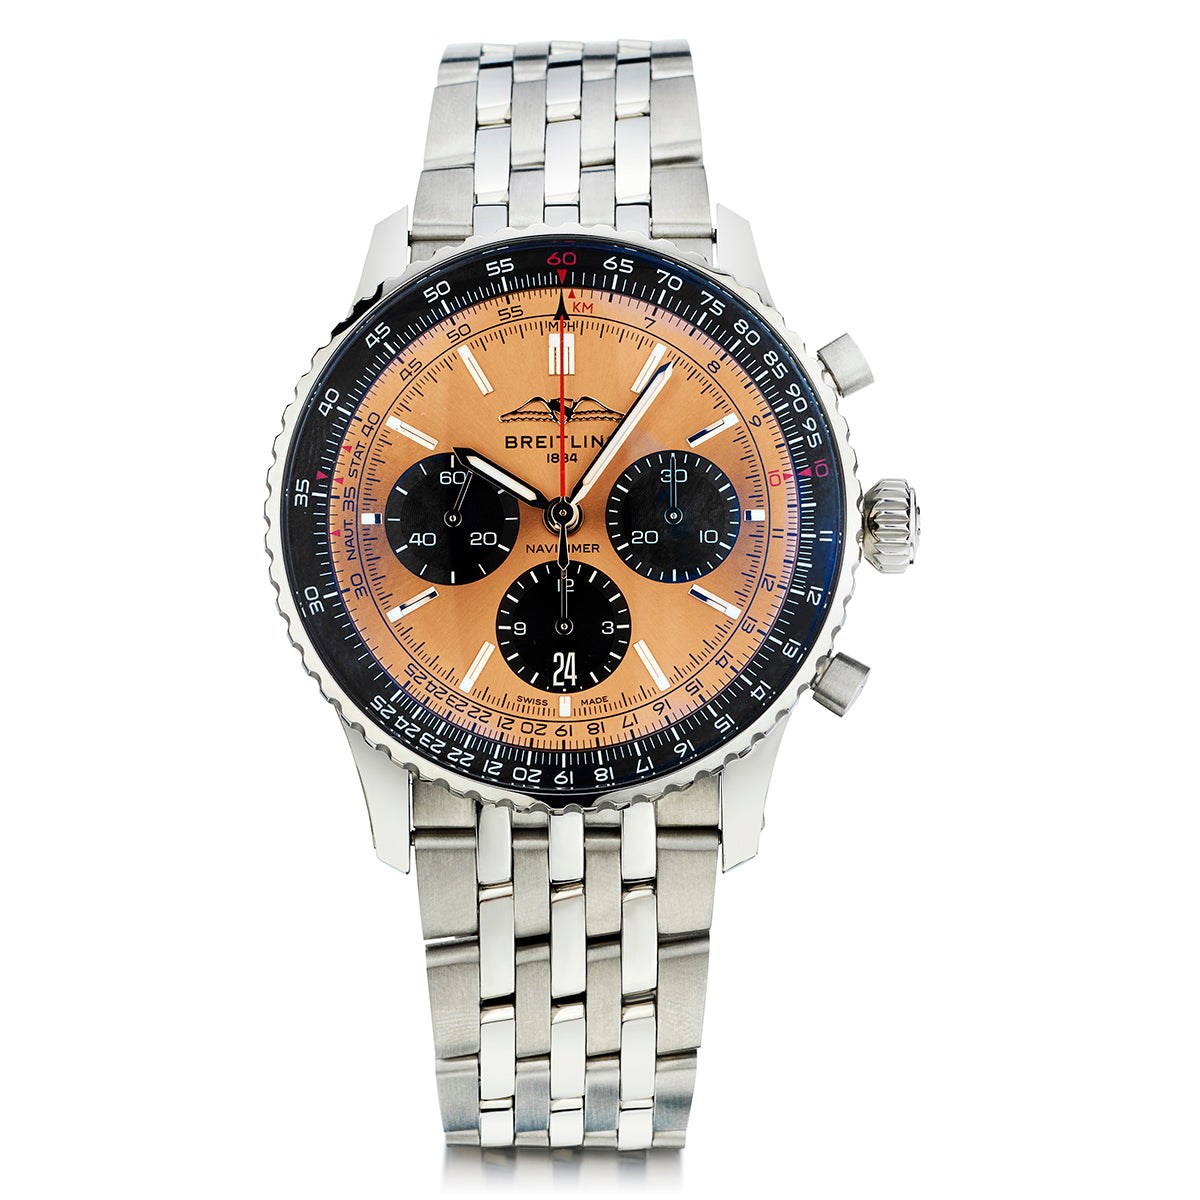 Breitling B01 Chronograph 43. Stainless Steel. Copper Dial.Reference: AB0138